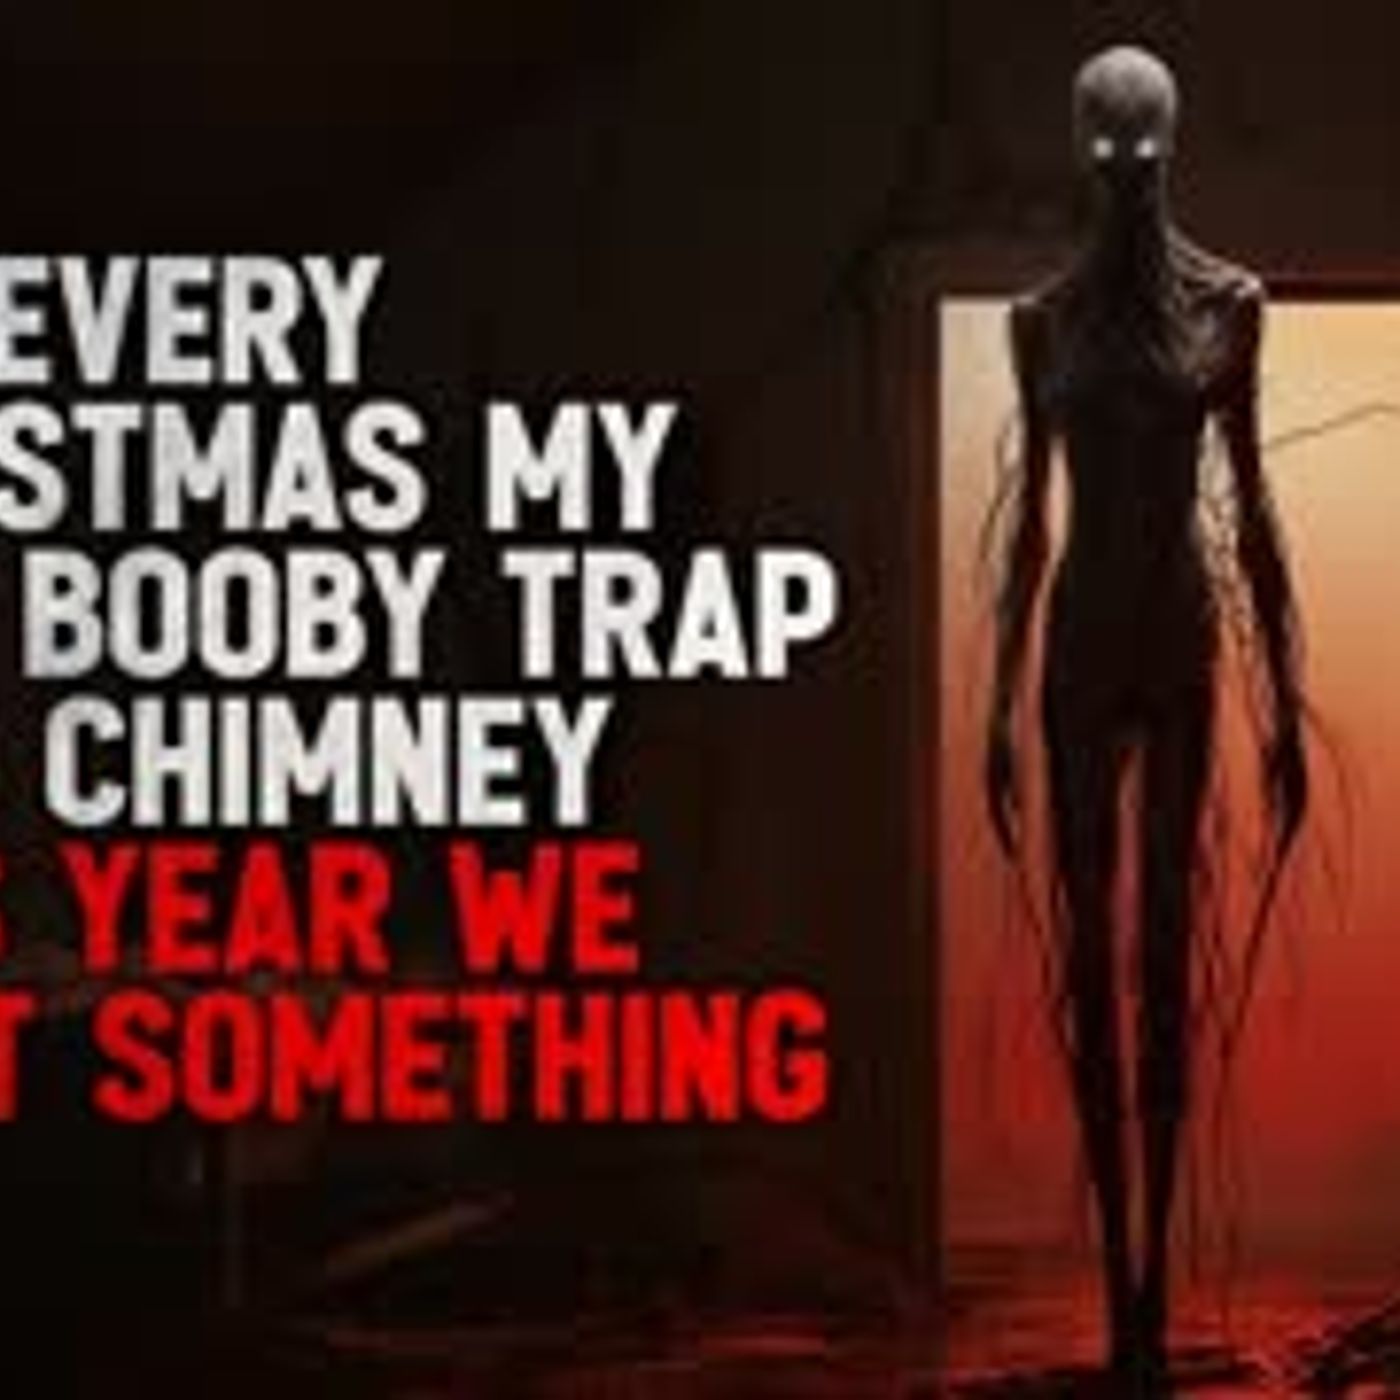 "Every Christmas my family booby trapped the chimney. This year we caught something" Creepypasta